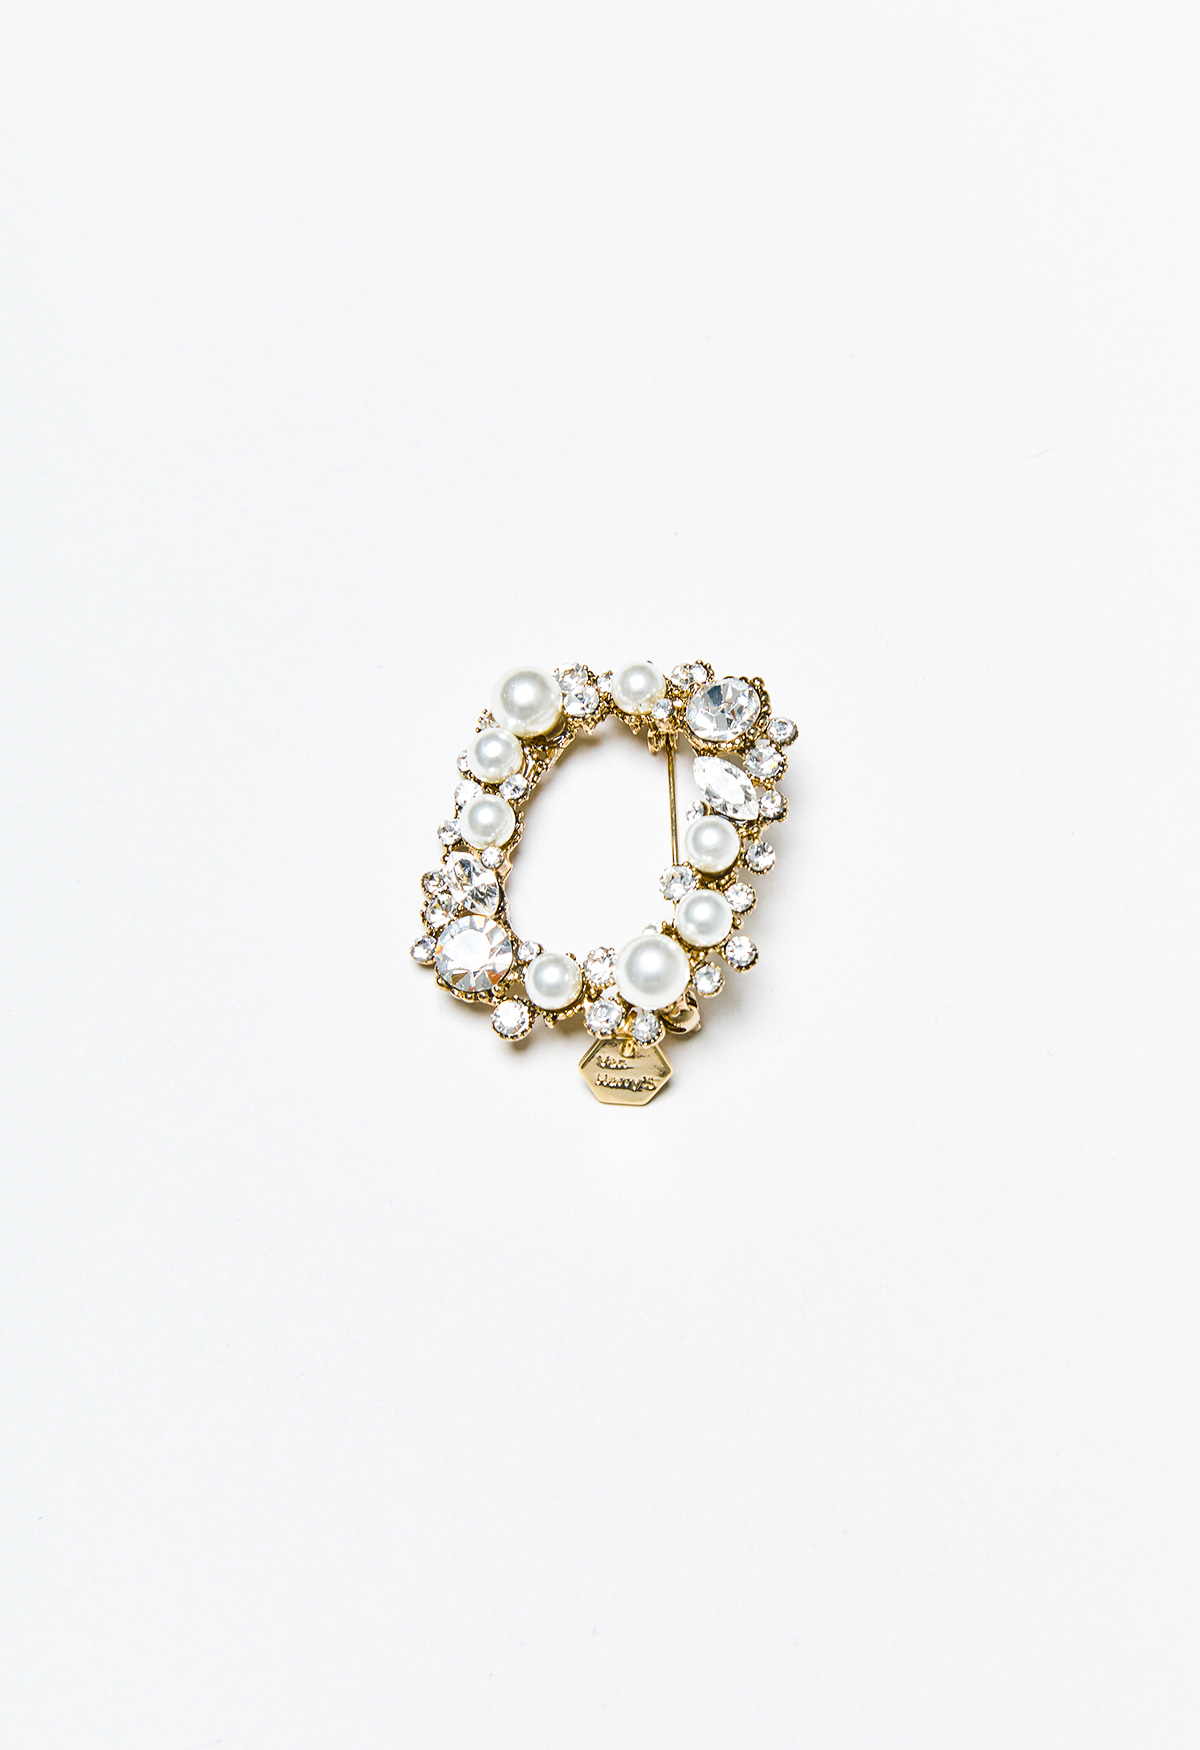 Pearl Brooch - Curved Square